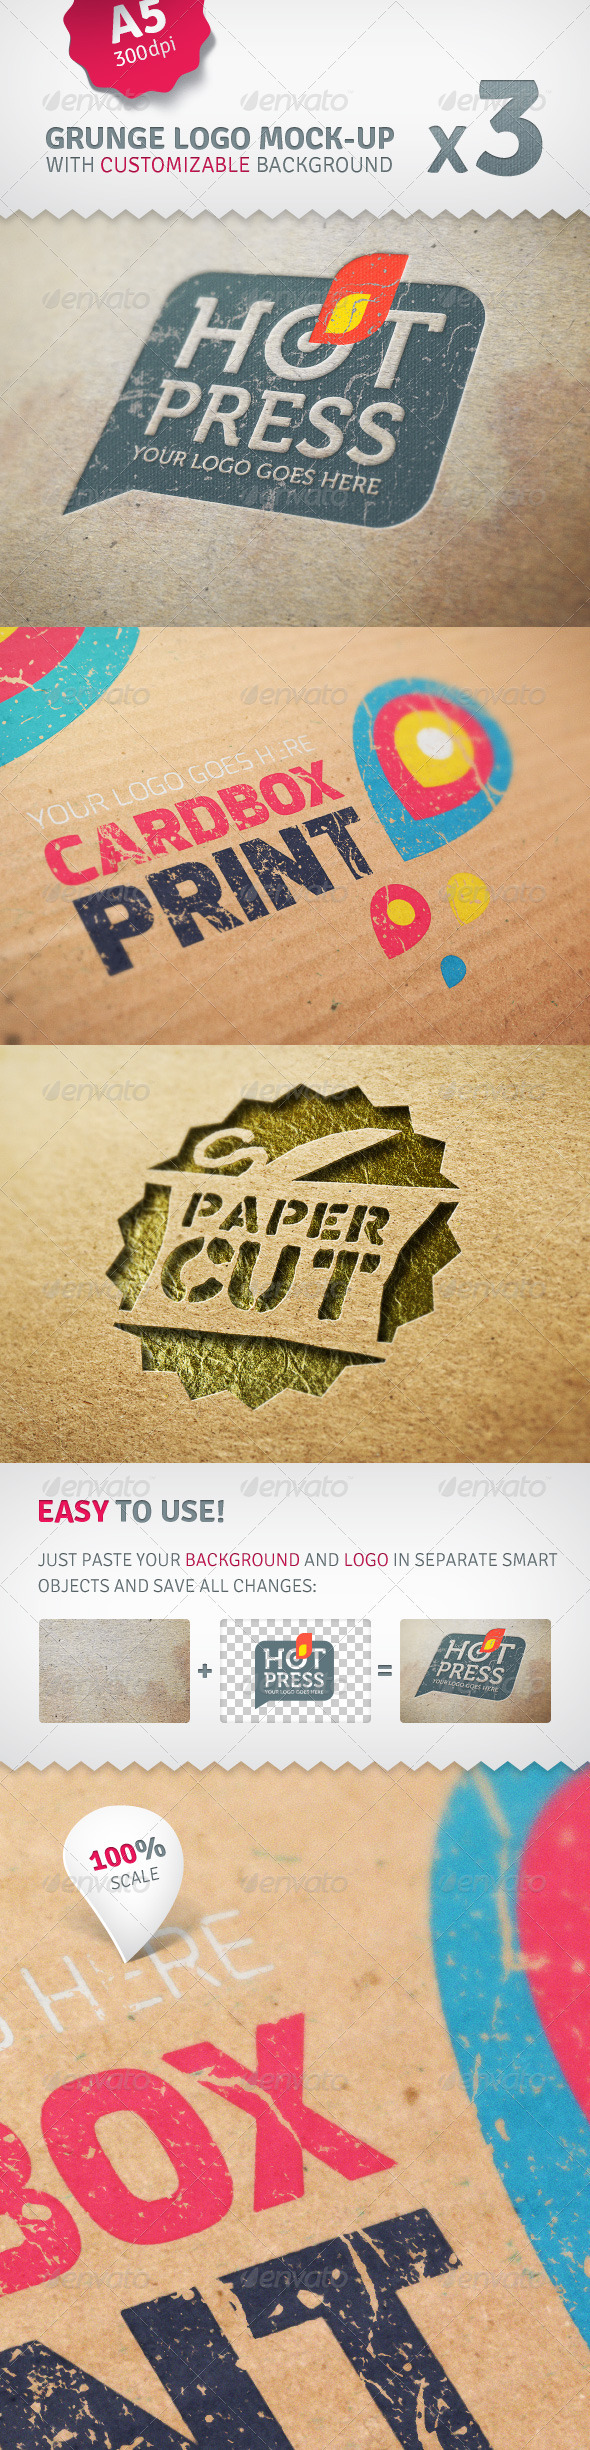 Download Cardboard Logo Mockup Pack With Custom Backgrounds by ...